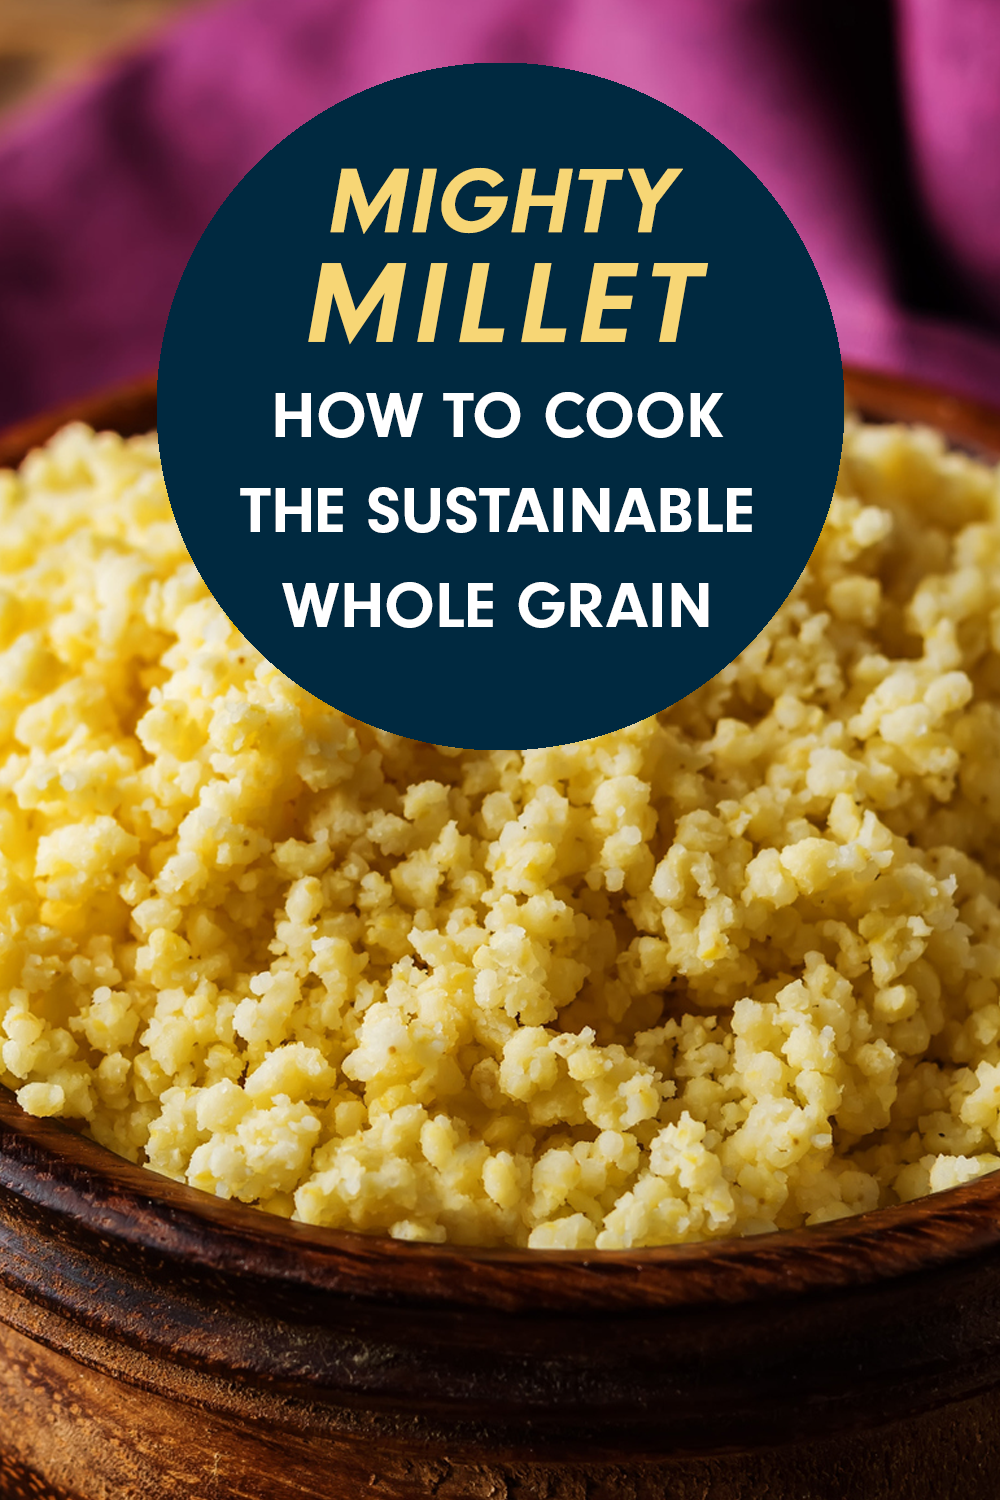 Mighty Millet: Why We Love the Whole Grain, Plus How to Cook It